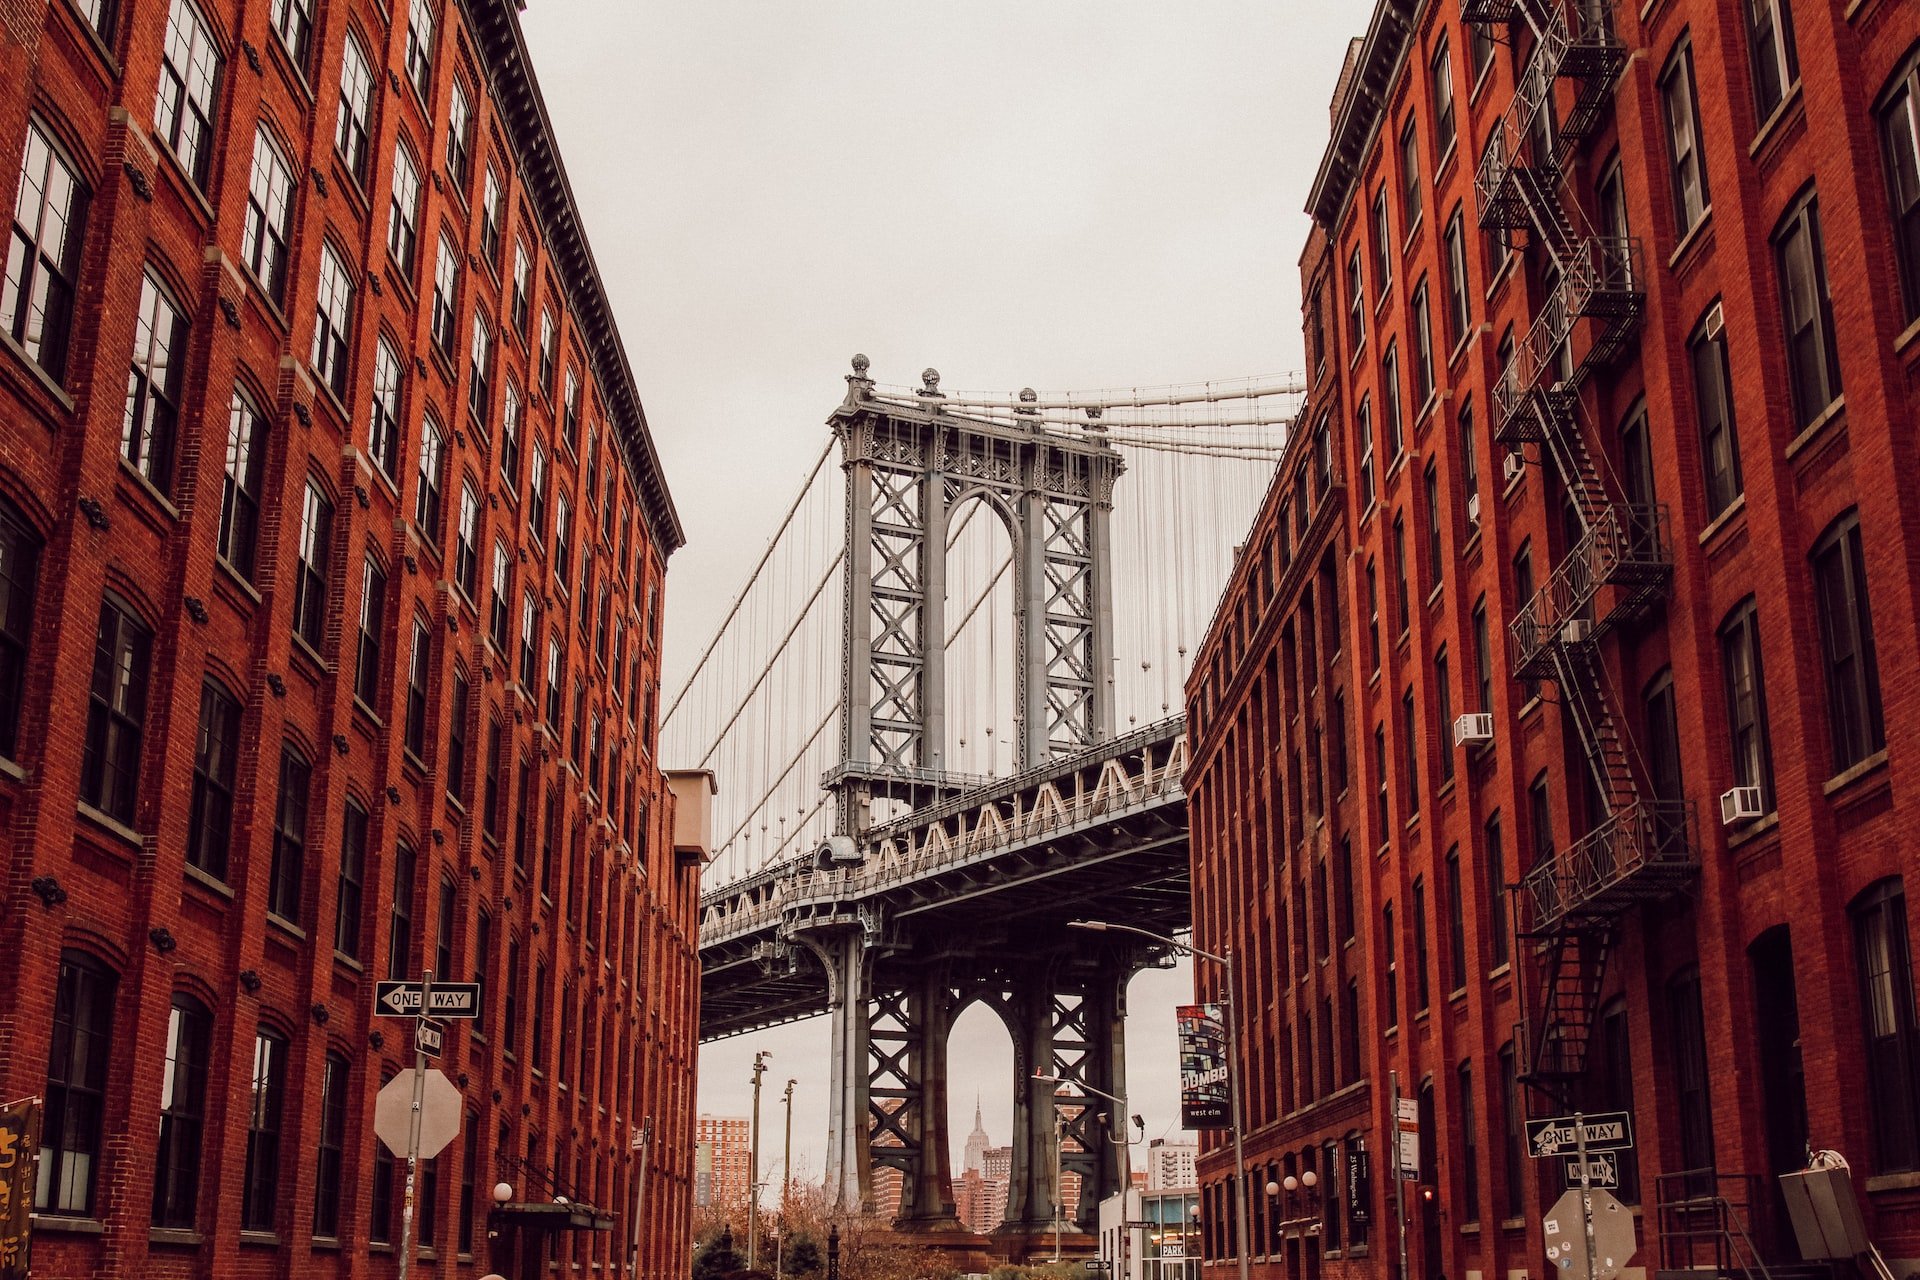 Make Your Own Adventure on a Self-Guided Tour of Brooklyn